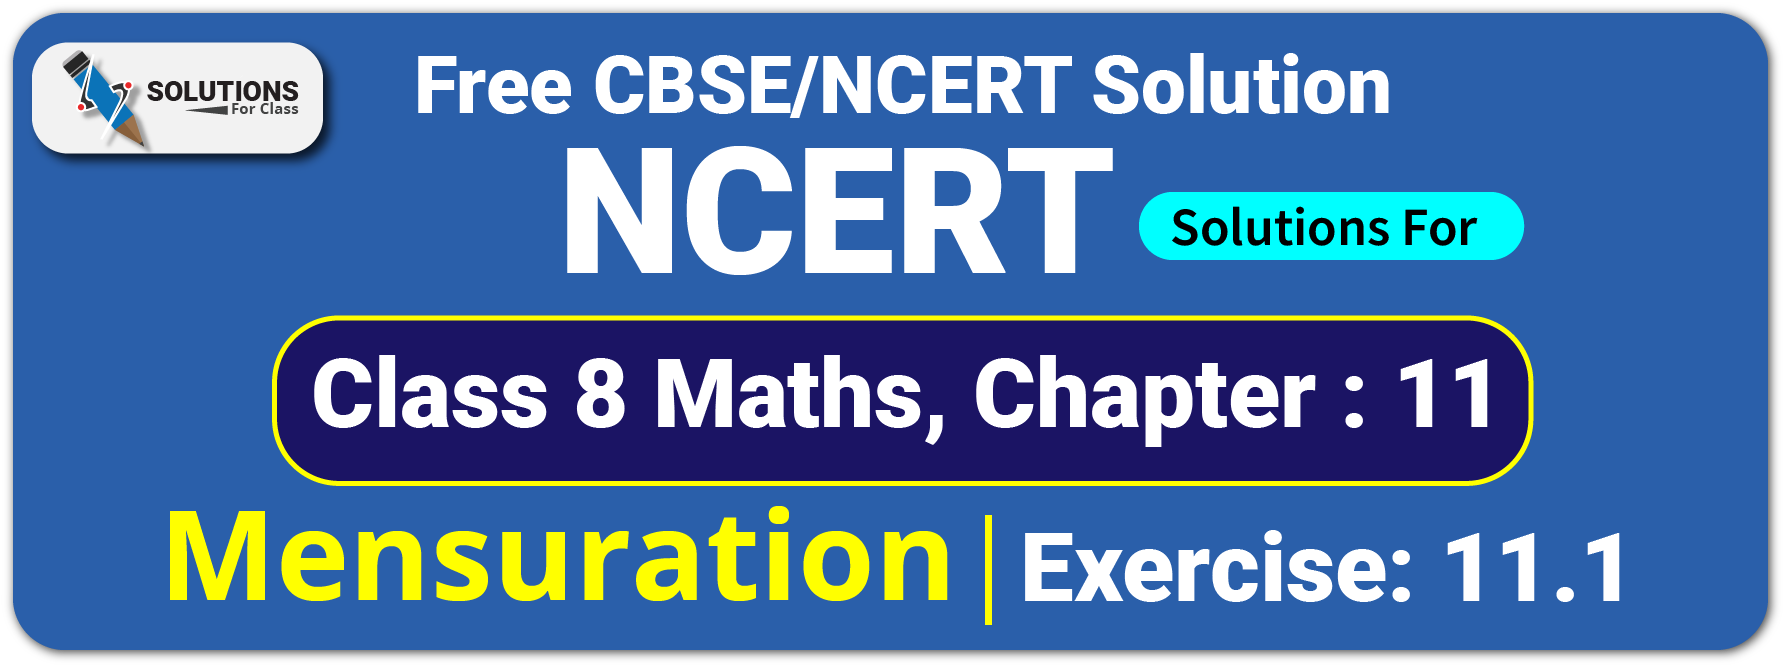 NCERT Solutions For Class 8 Chapter 11, Mensuration, Exercise.11.1